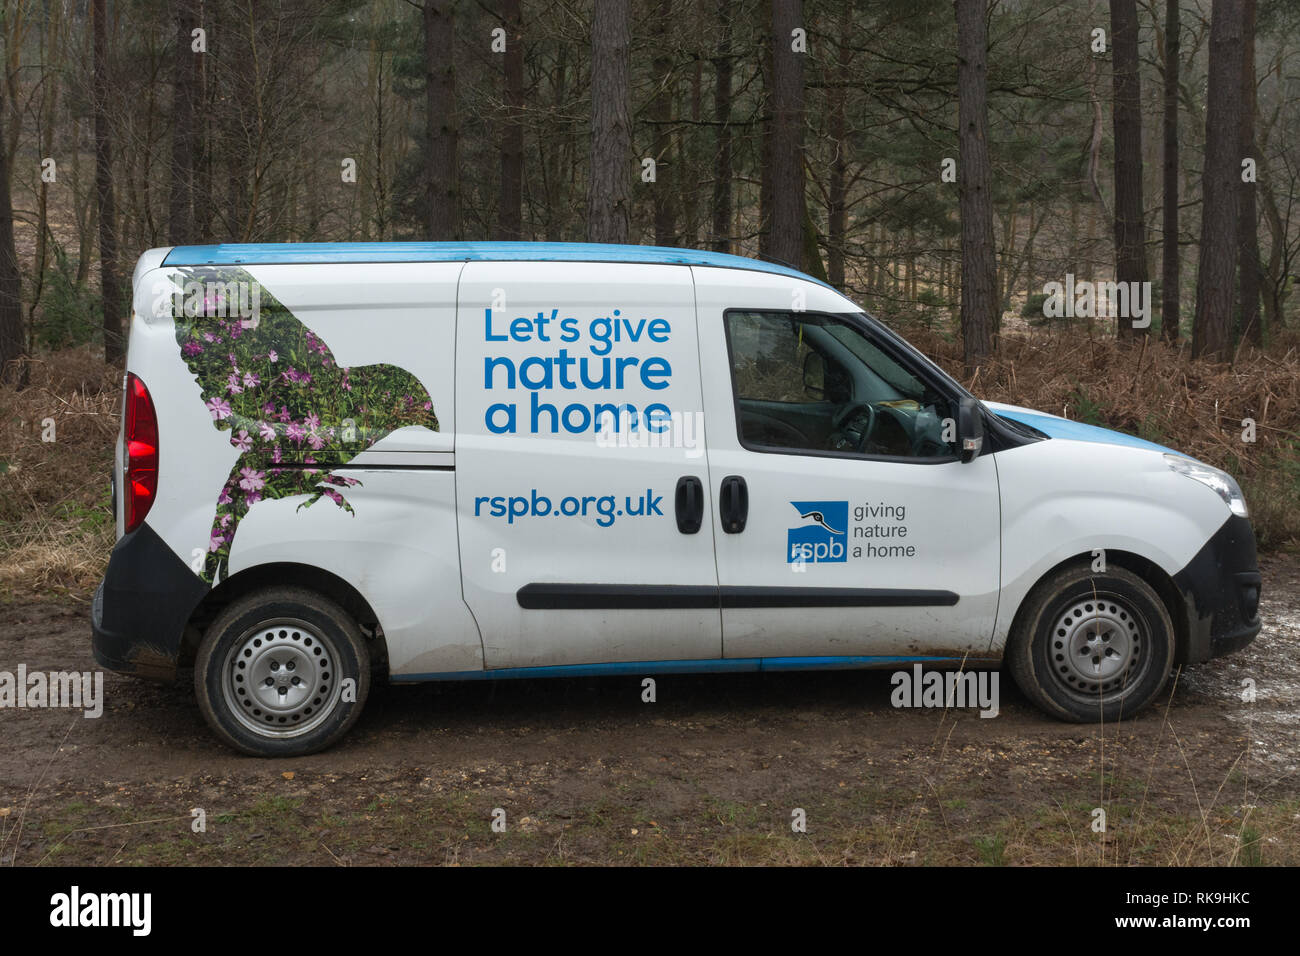 An RSPB van or vehicle parked in woodland with the logo Let's give nature a home. Stock Photo